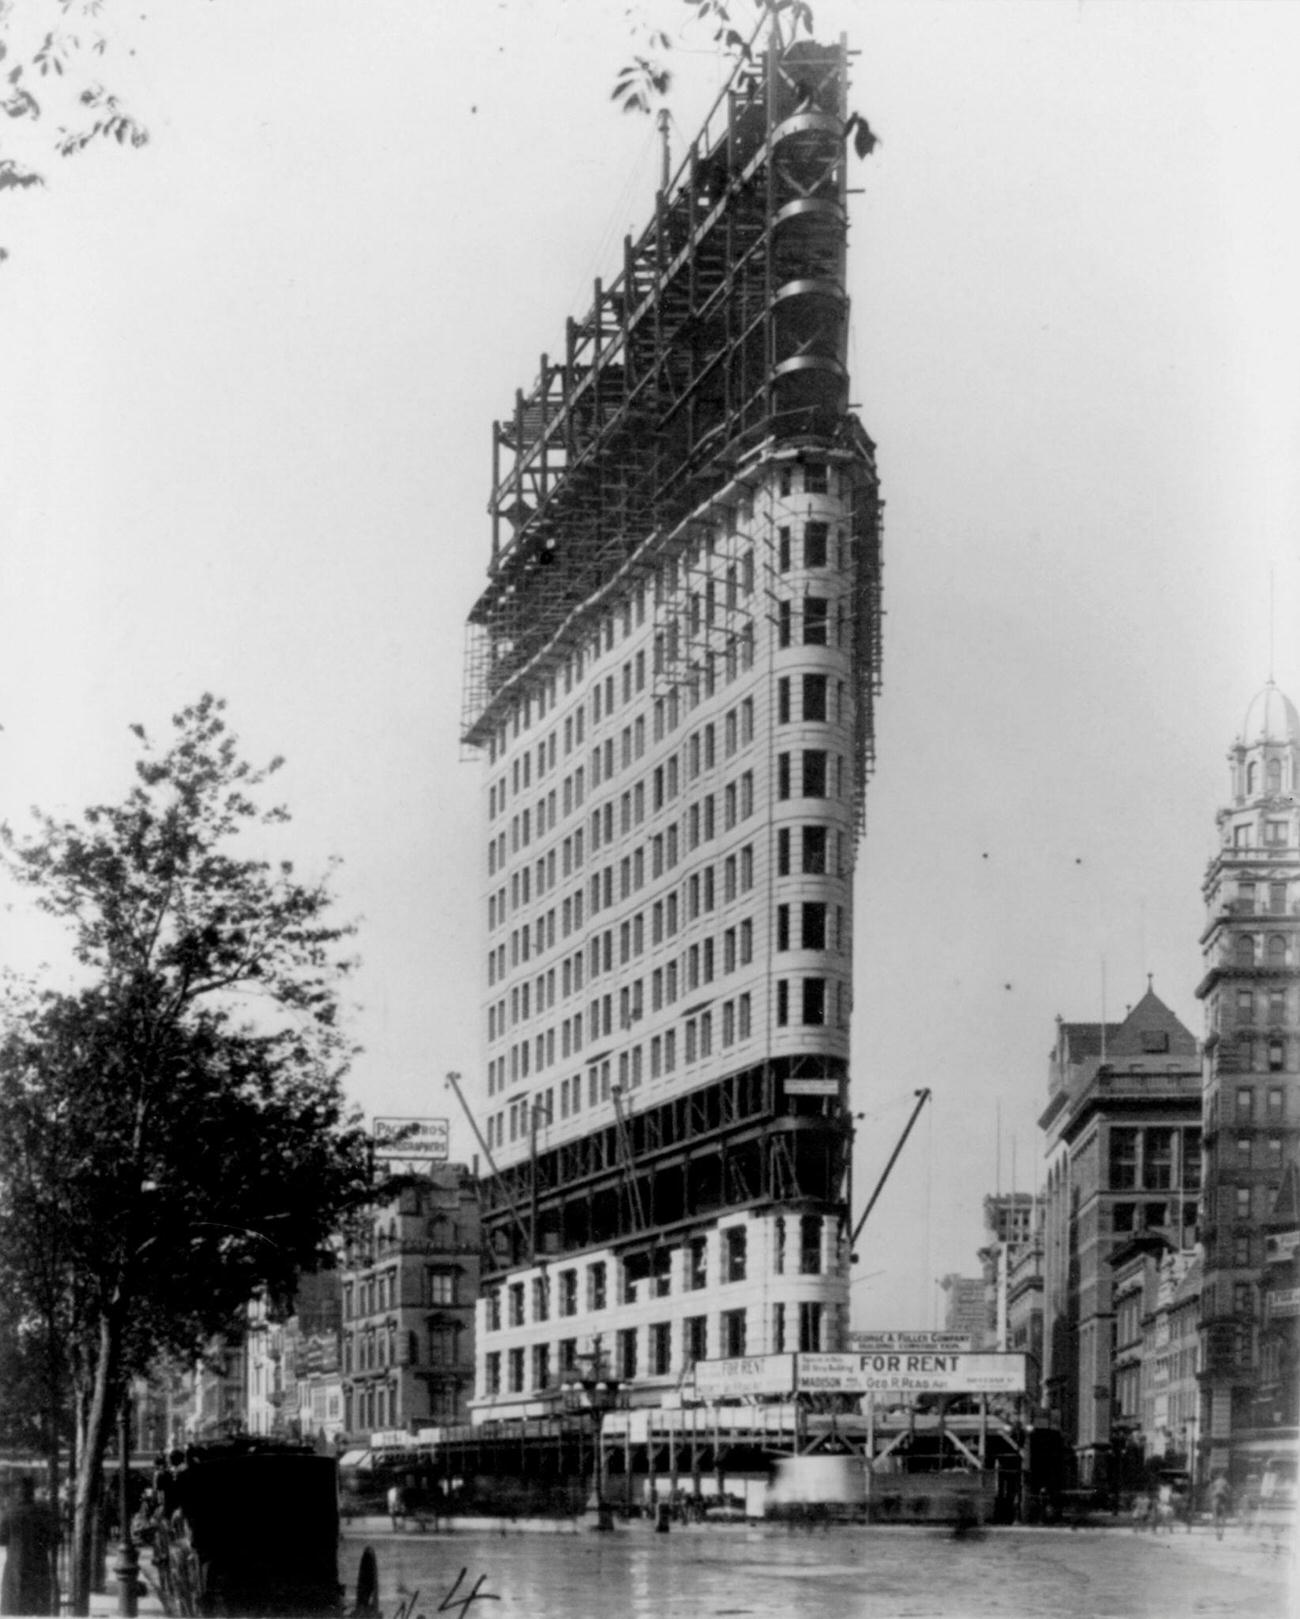 View Of The Flatiron Building, Or The Fuller Building, Under Construction In New York City, 1902